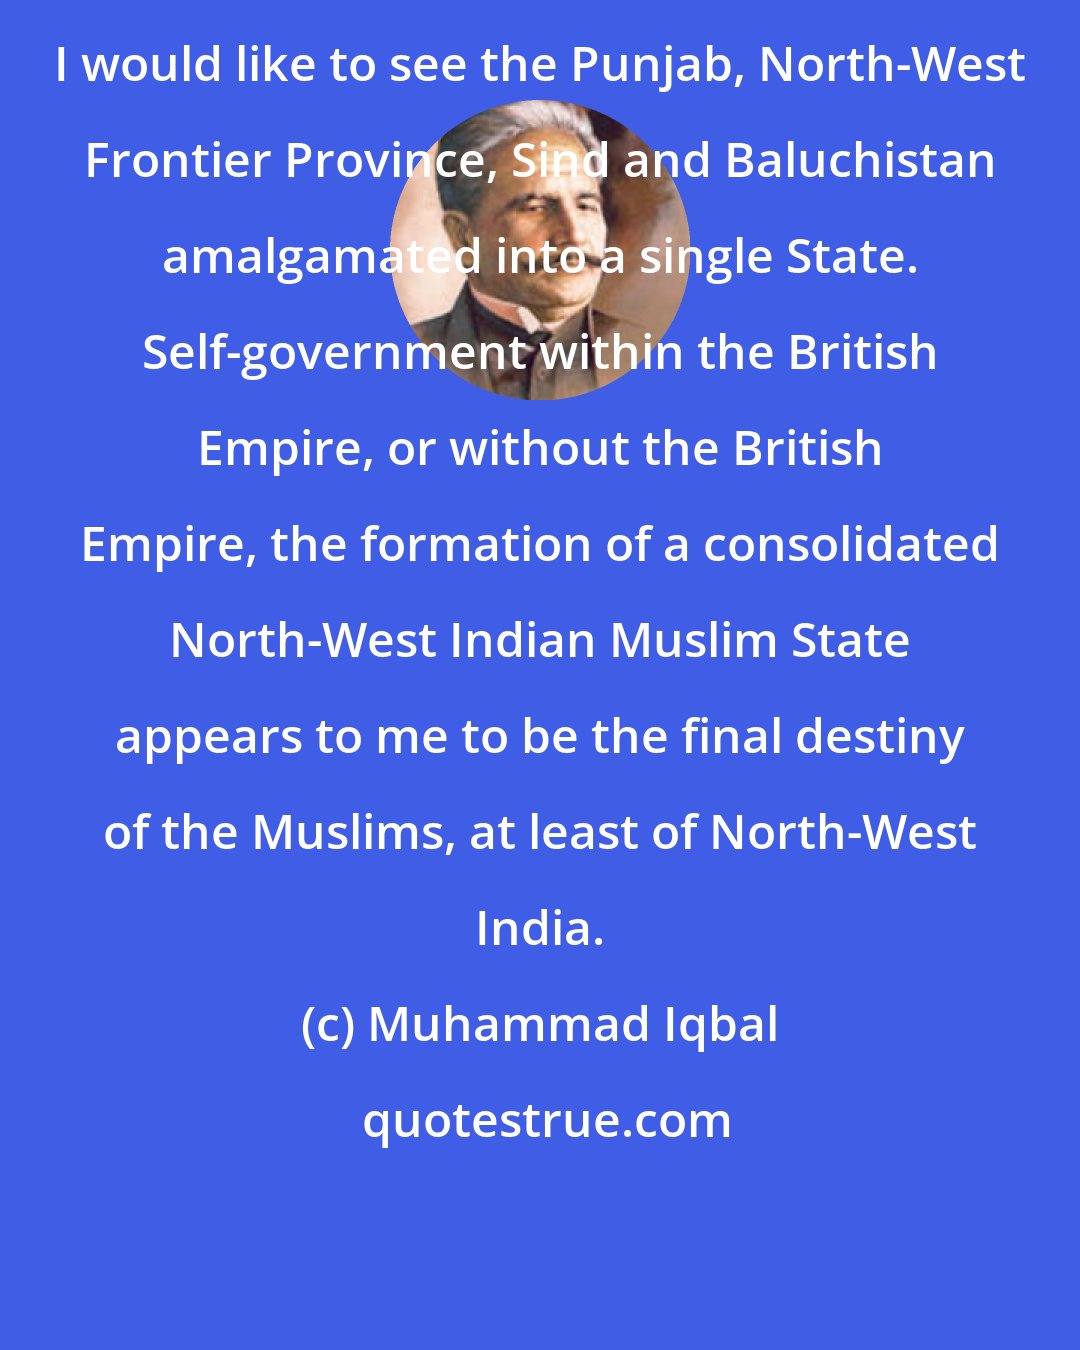 Muhammad Iqbal: I would like to see the Punjab, North-West Frontier Province, Sind and Baluchistan amalgamated into a single State. Self-government within the British Empire, or without the British Empire, the formation of a consolidated North-West Indian Muslim State appears to me to be the final destiny of the Muslims, at least of North-West India.